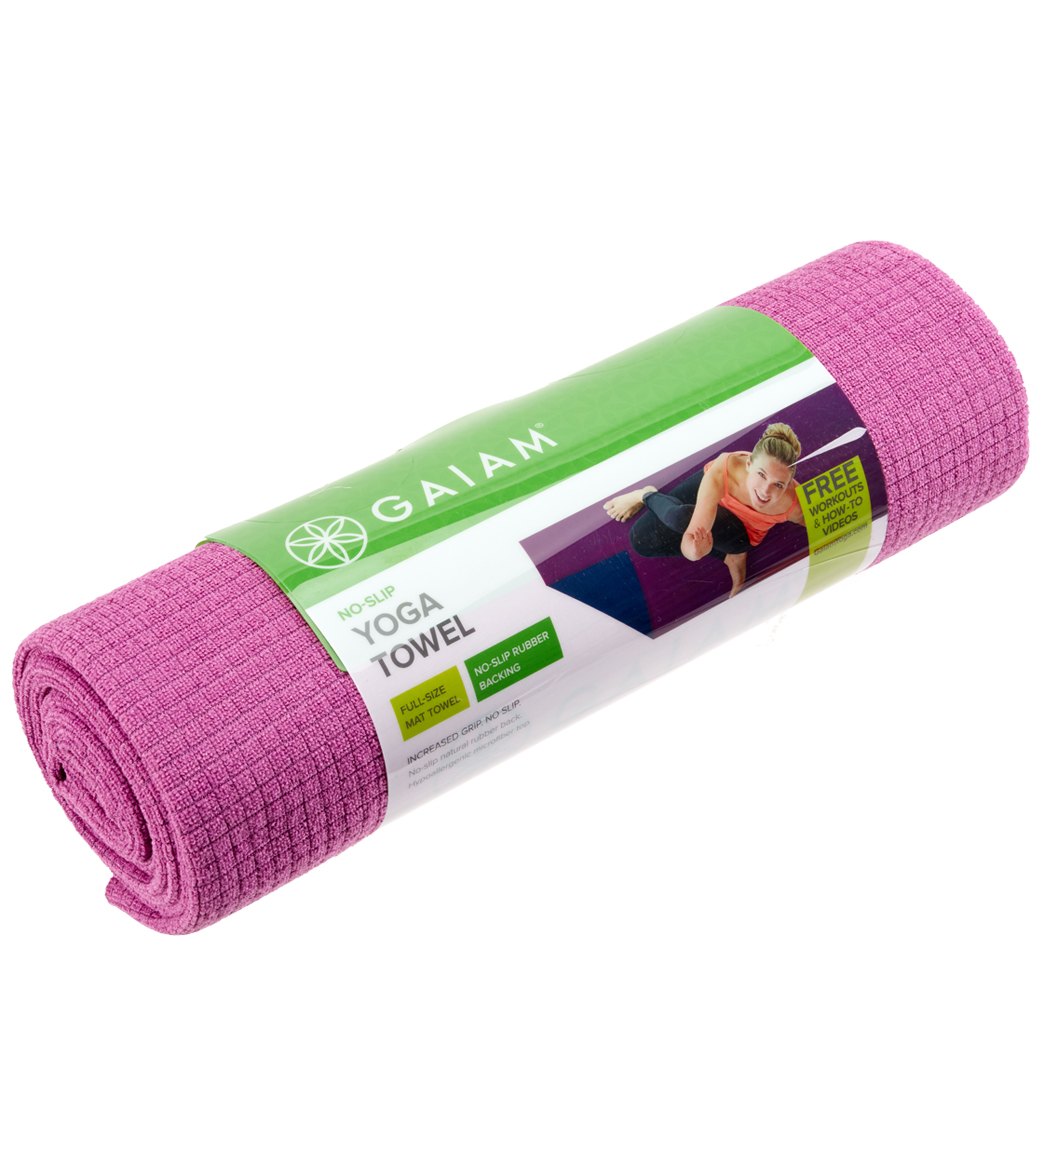 This Gaiam Yoga Mat Keeps My Feet from Slipping